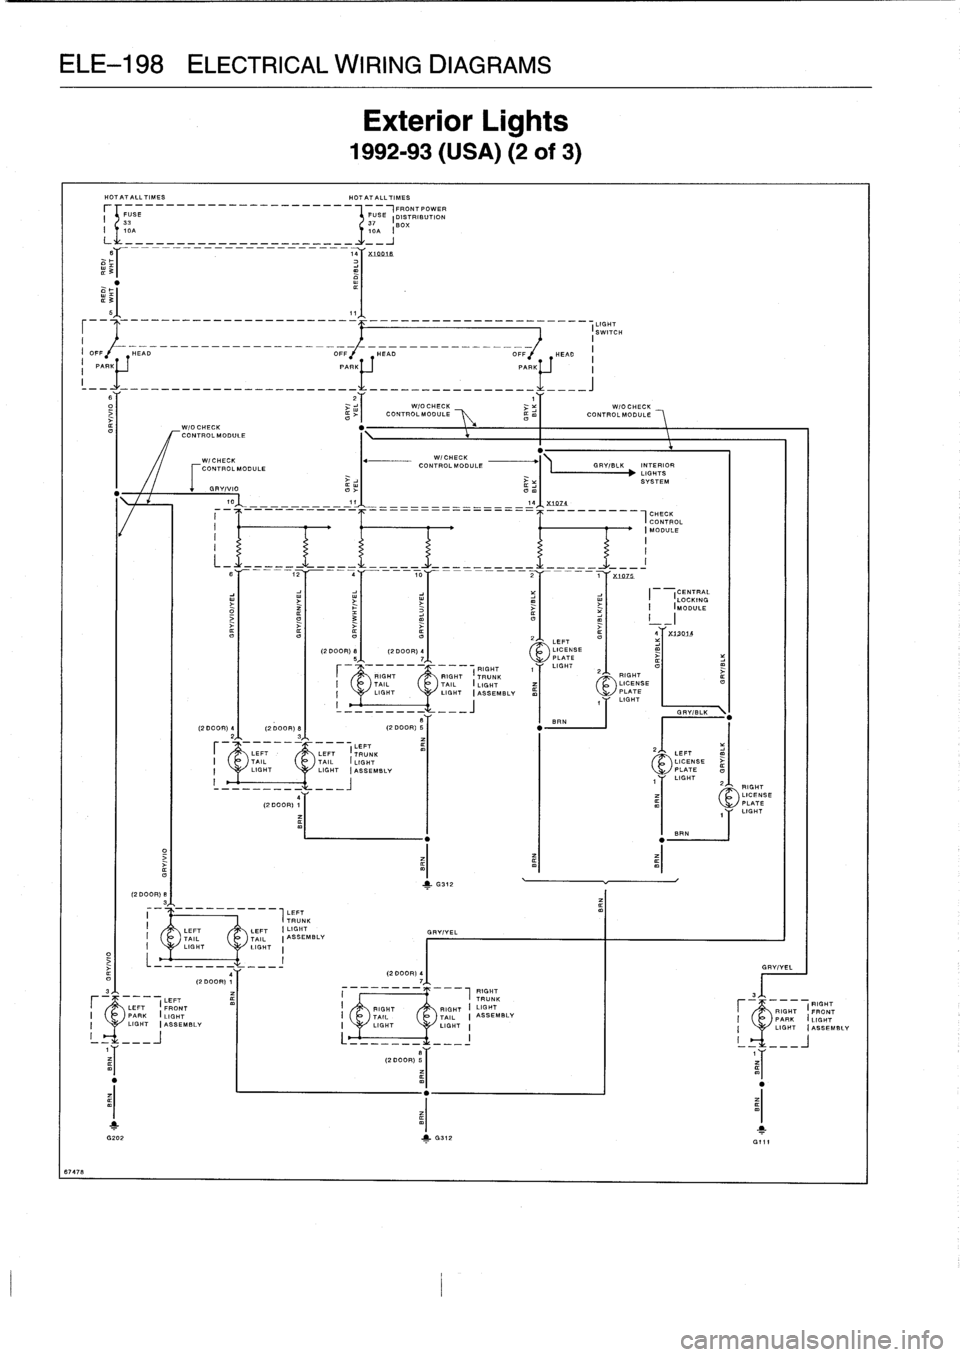 BMW 323i 1998 E36 Repair Manual 
ELE-198
ELECTRICAL
WIRING
DIAGRAMS

87478

HOTATALLTIMES

	

HOT
AT
ALL
TIMES
-------------------
71FRONTPOWER
I

	

FUSE

	

FUSE
(DISTRIBUTION
33

	

37
BOX

-=r
3

10A

	

t0A
I
__
I
%(00,9

_

	
